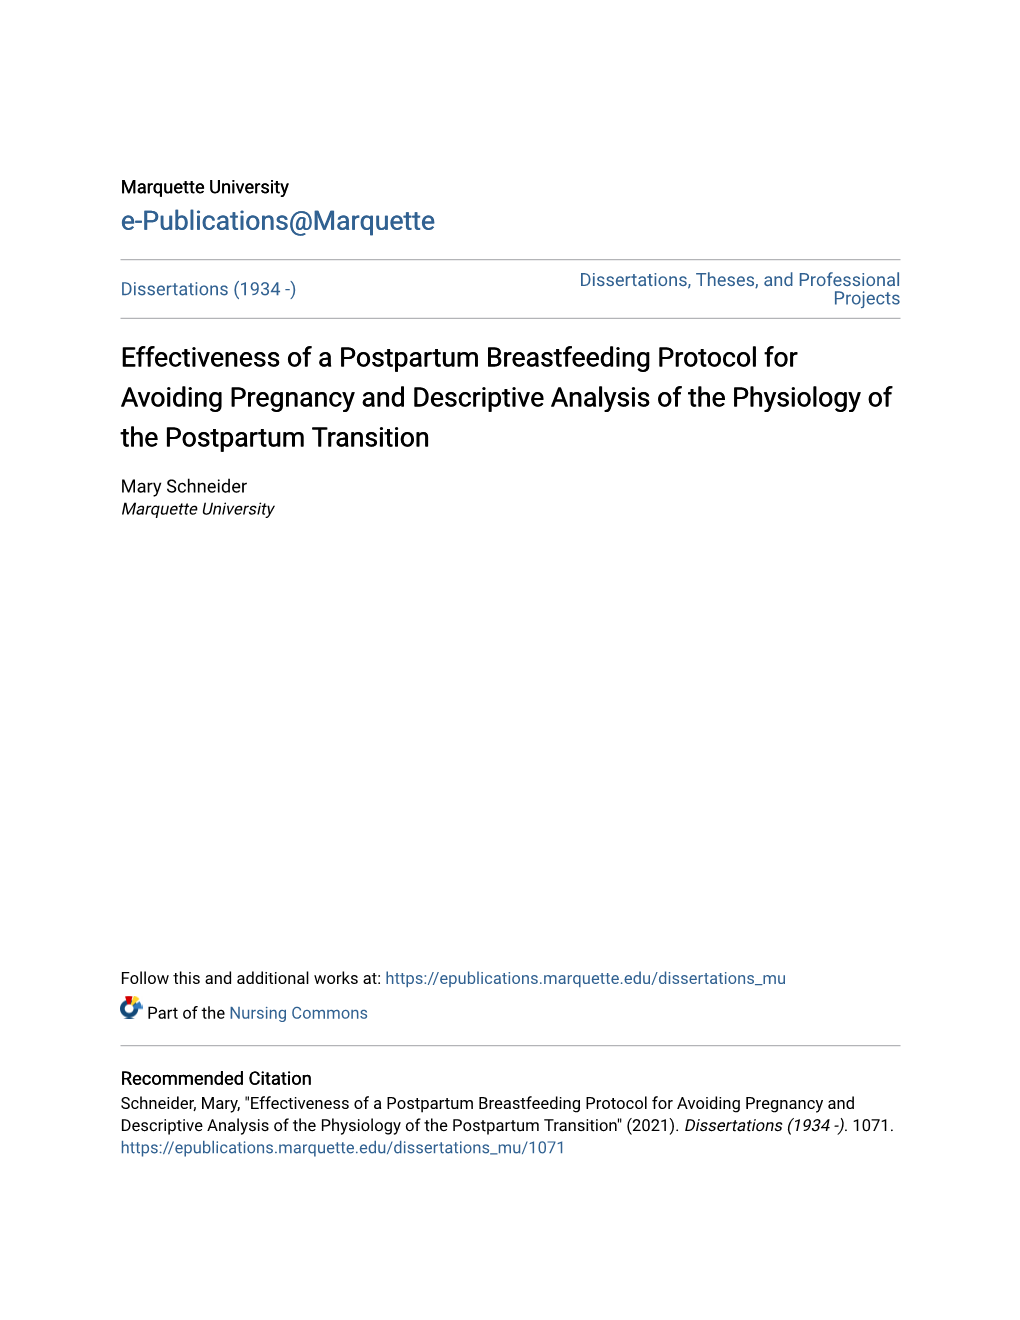 Effectiveness of a Postpartum Breastfeeding Protocol for Avoiding Pregnancy and Descriptive Analysis of the Physiology of the Postpartum Transition